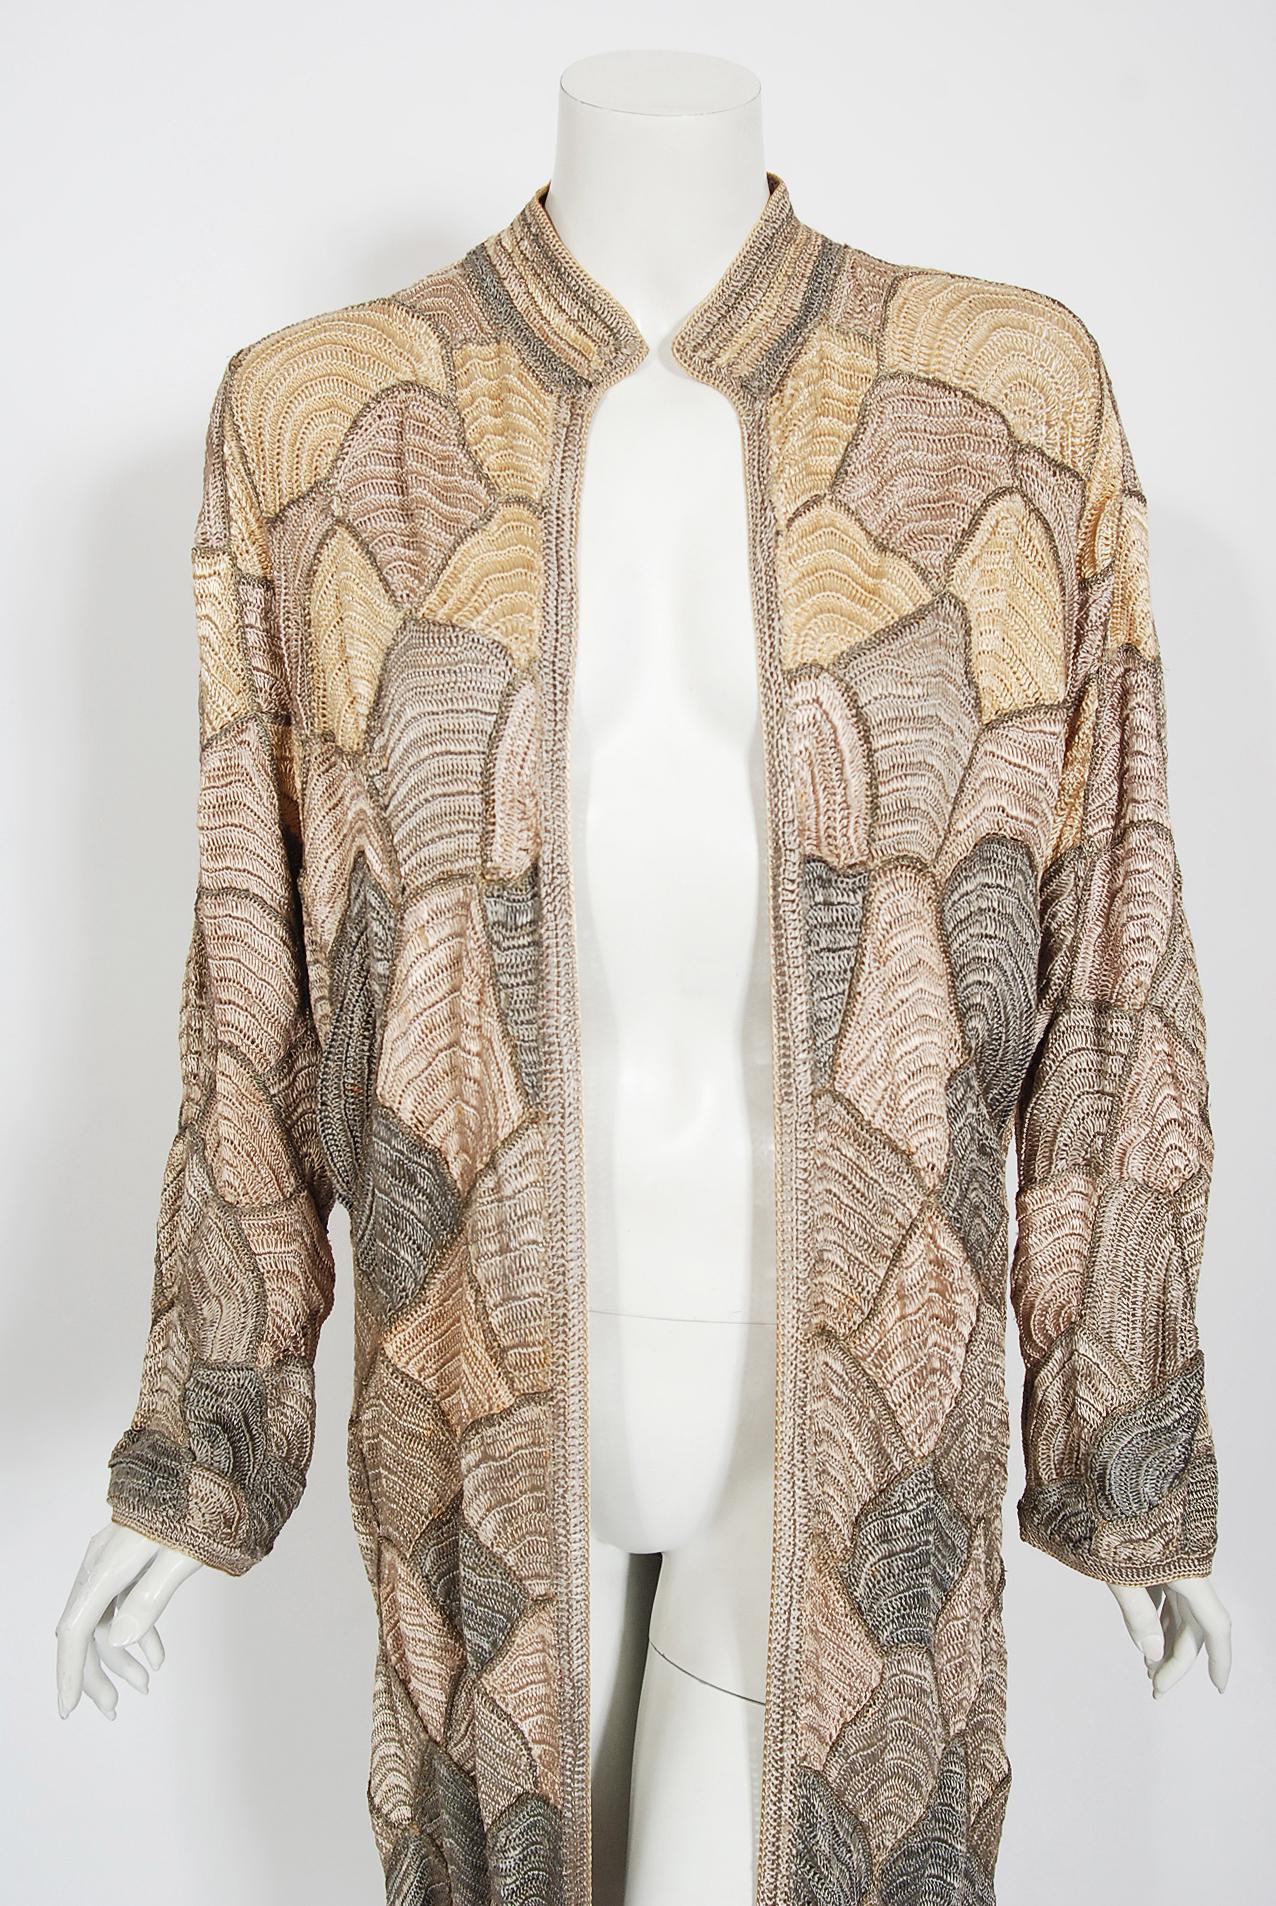 Extremely stylized Austrian deco knit jacket from the mid-1920's which could easily be a Wiener Werkstatte couture made for export. The Wiener Werkstatte was founded in 1903 by the young architect Josef Hoffmann and his artist friend, Koloman Moser.